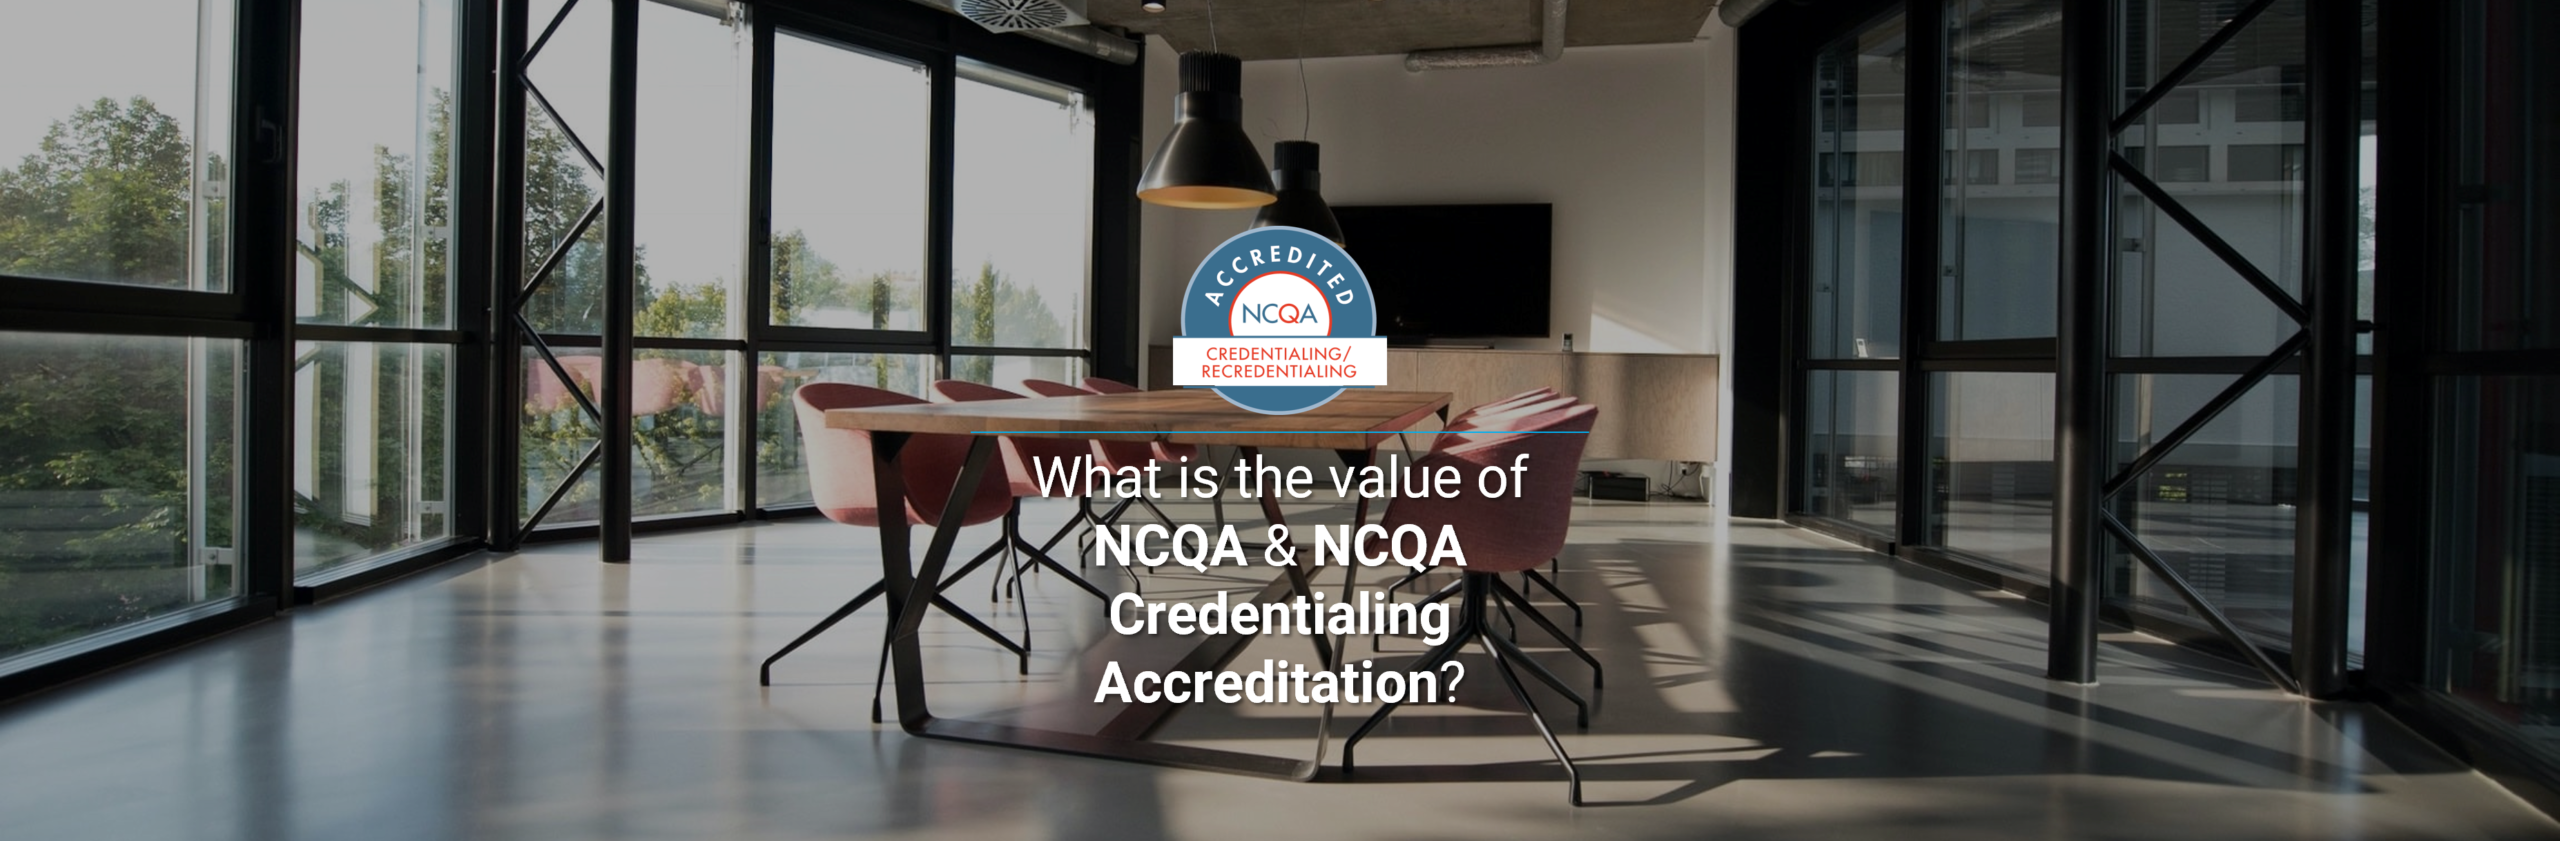 What is the value of NCQA and NCQA Credentialing Accreditation